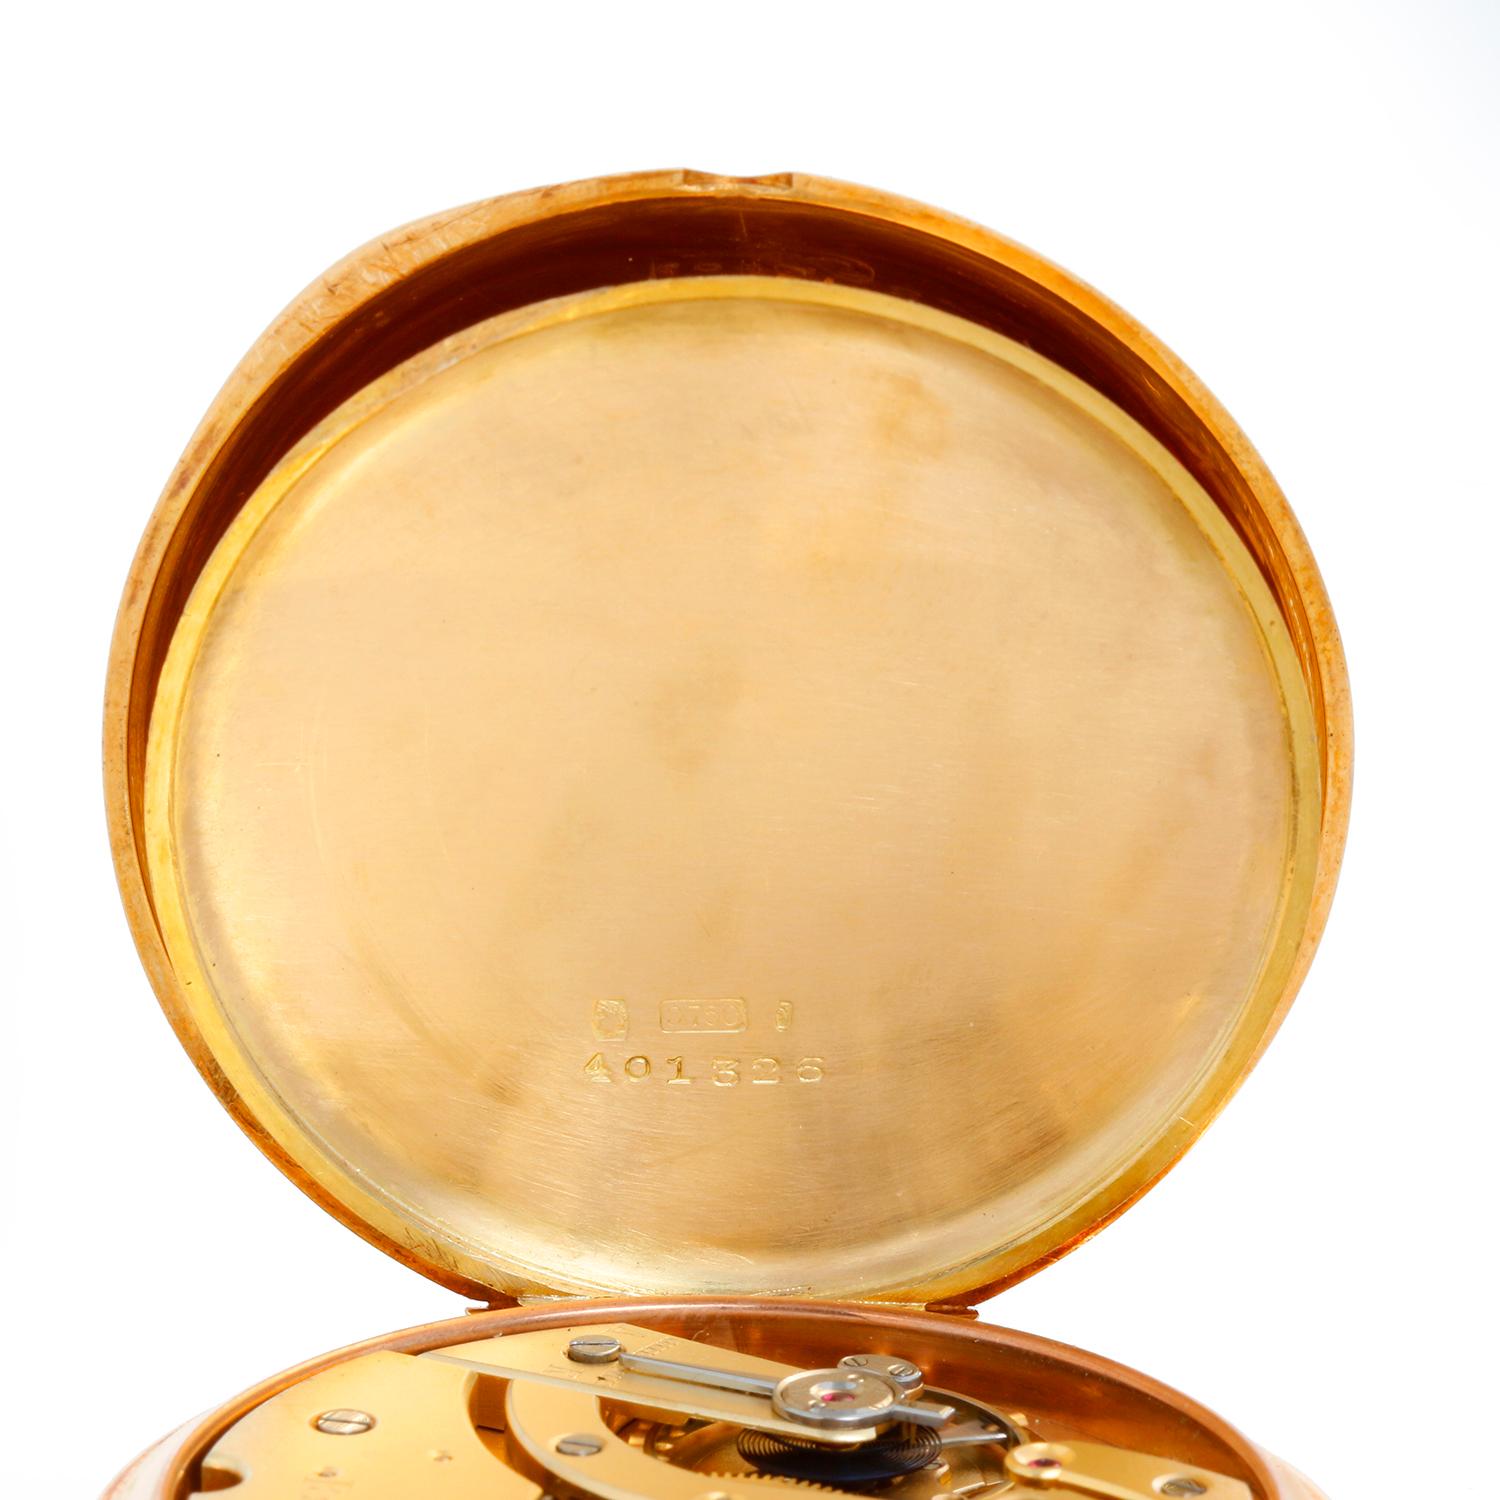 Patek Philippe 18K Hunting Case Roman Numerals Pocket Watch For Sale 1